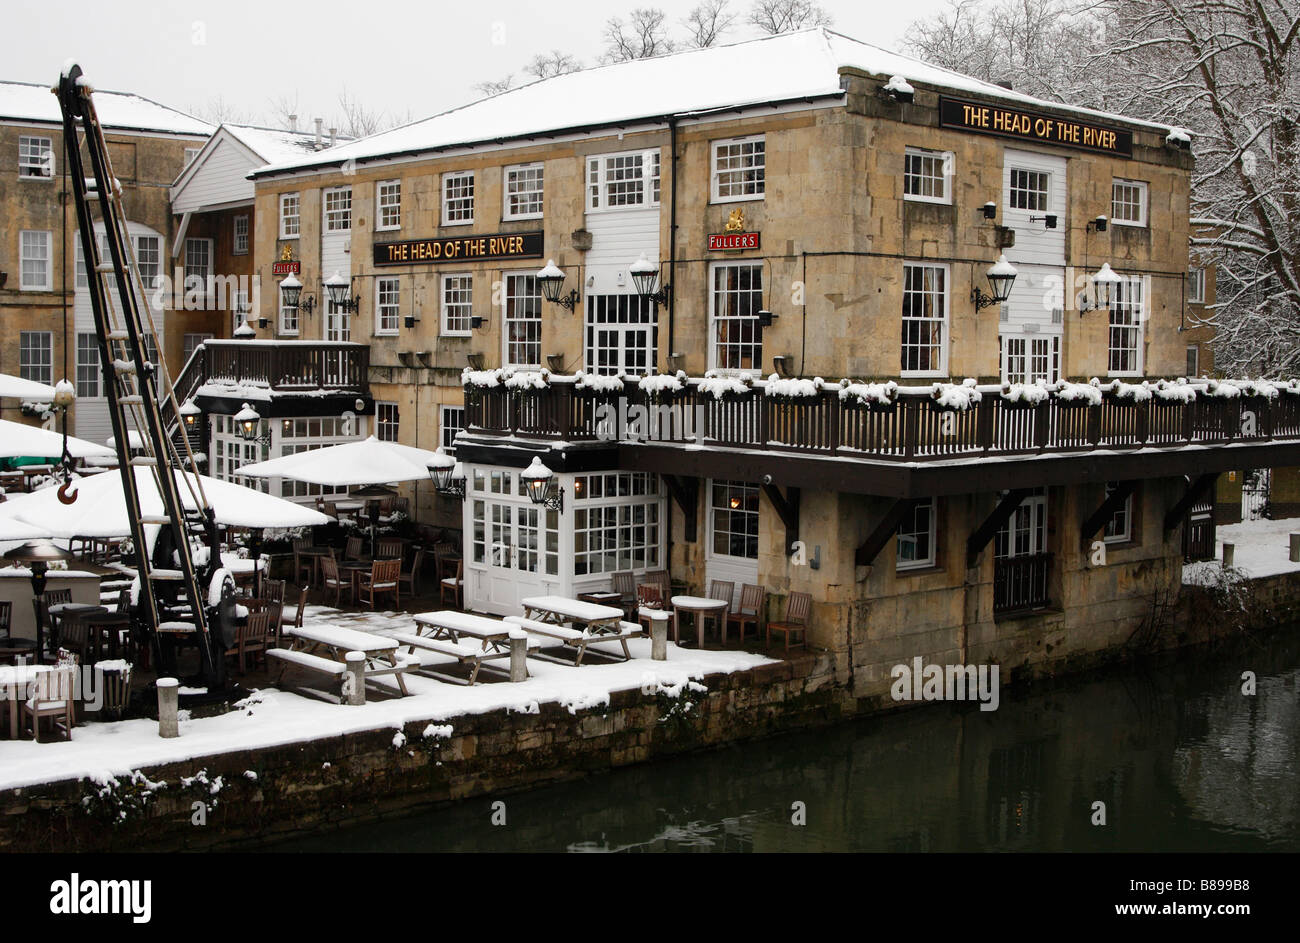 Oxford winter scene, 'Head of the River' pub building covered in snow next to the [River Thames], England, UK Stock Photo